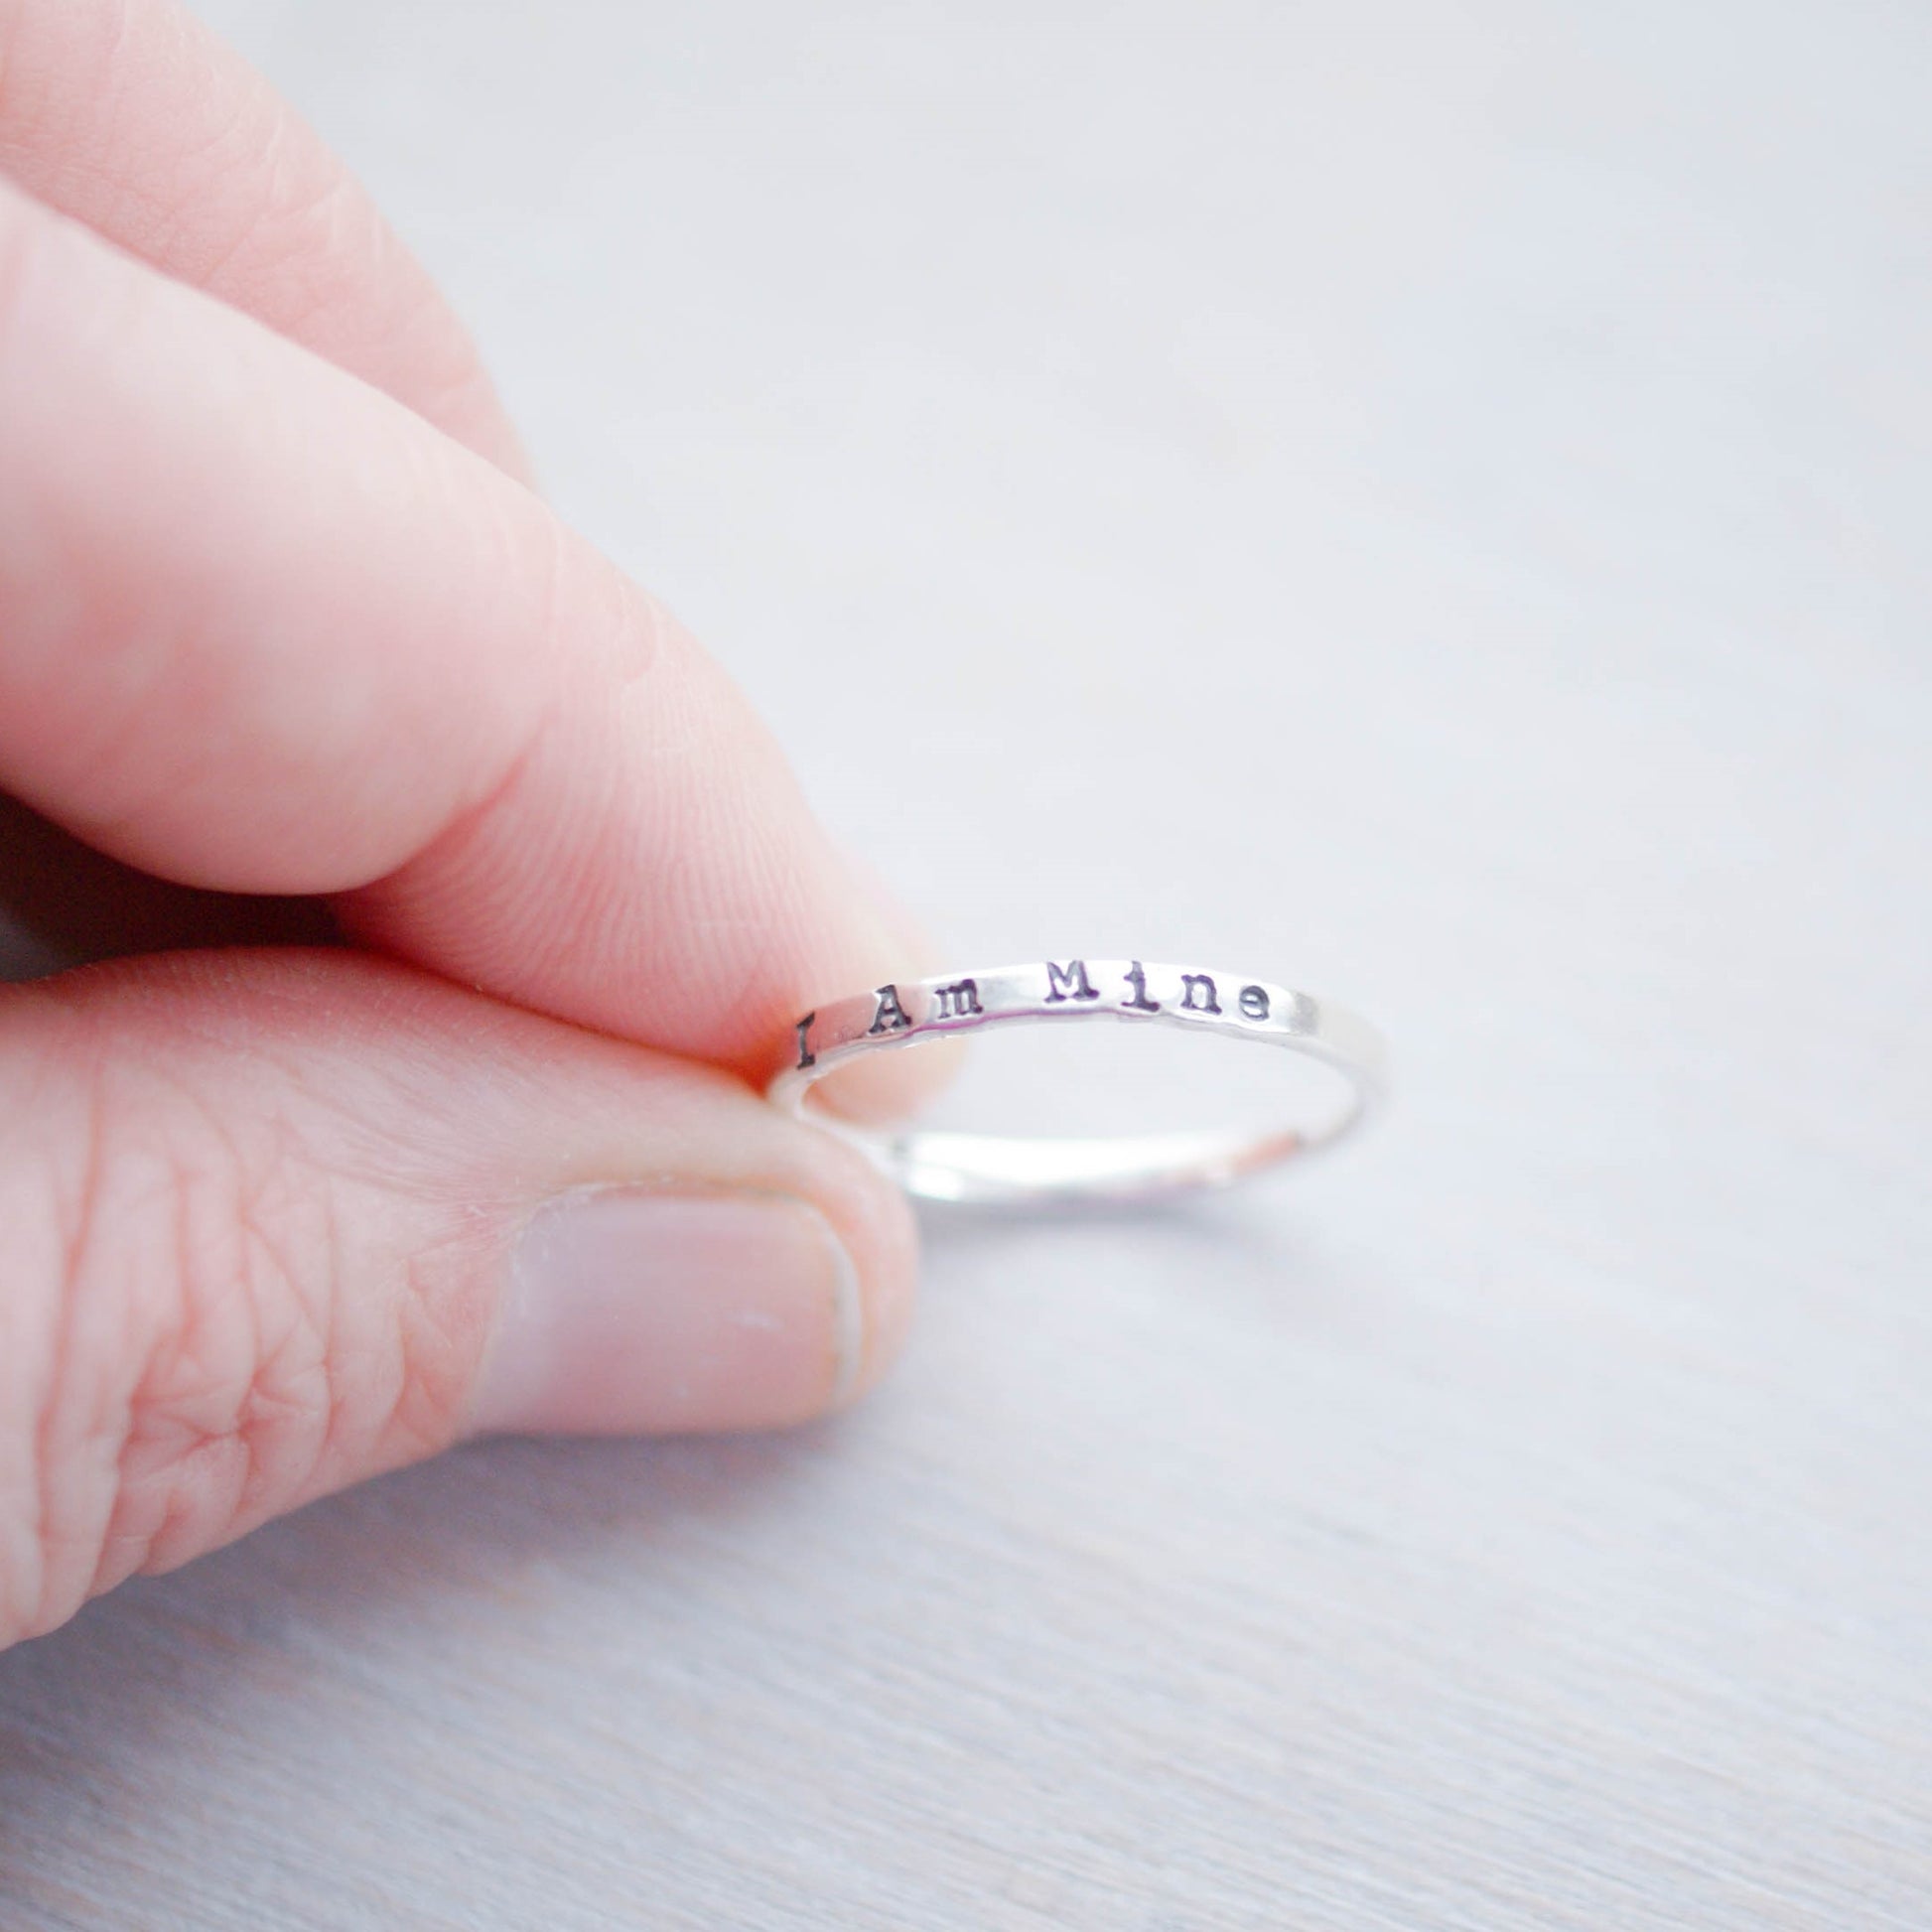 Sterling Silver Stacking Ring handstamped with I Am Mine being held between fingers